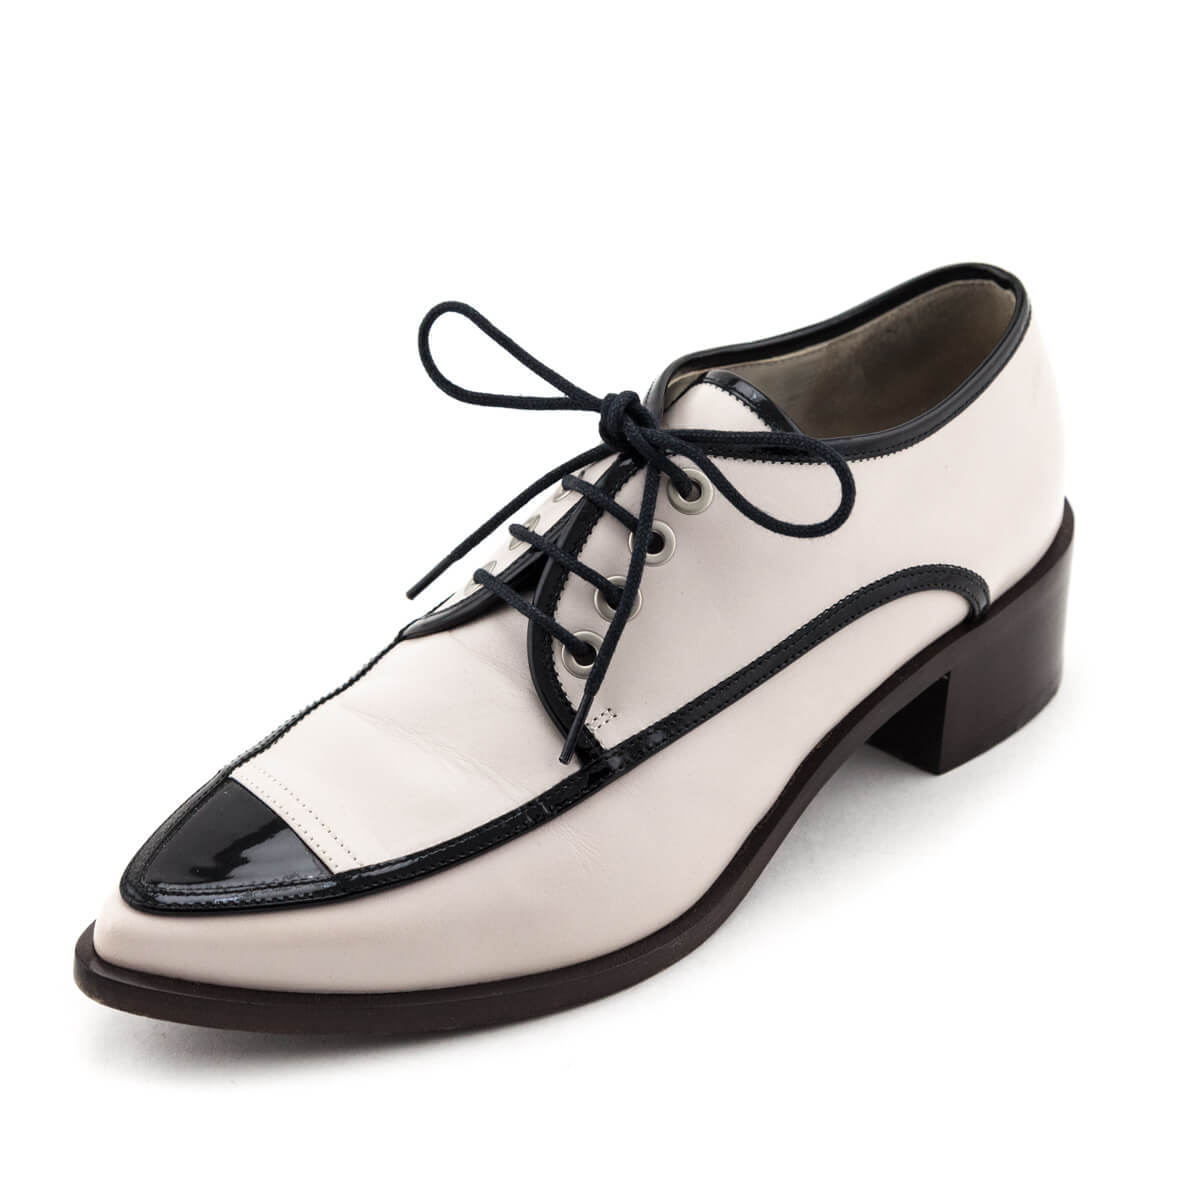 Chanel Black & White Pointed Toe Oxfords Size US 7 | EU 37 - Love that Bag etc - Preowned Authentic Designer Handbags & Preloved Fashions